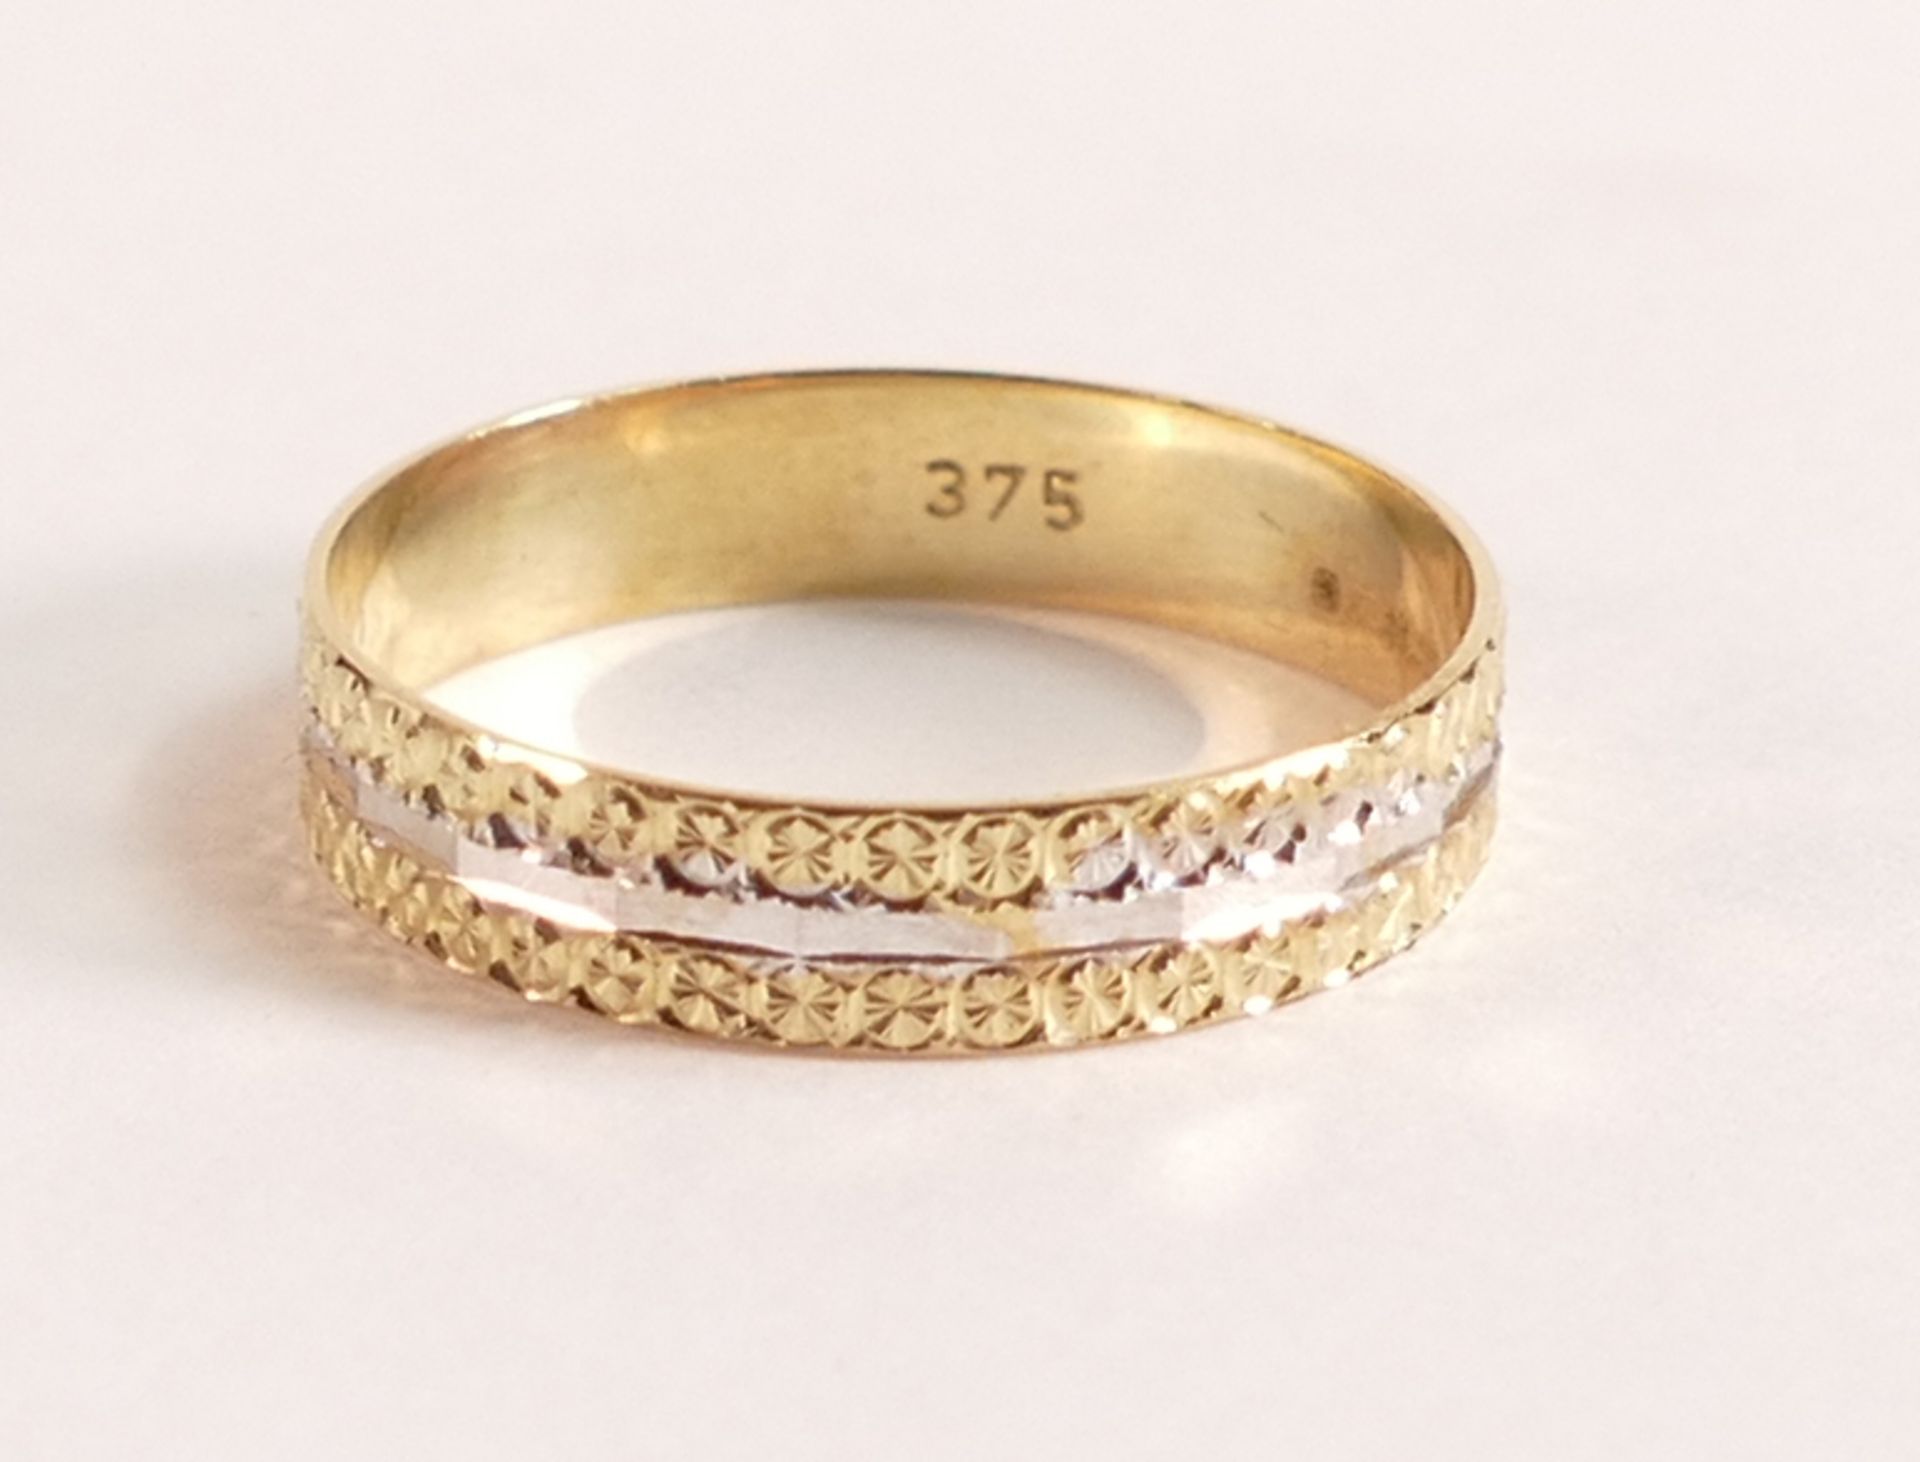 9ct Gold Wedding Band - Sparkle design, 9ct Yellow Gold band. Diamond Cut Sparkle Design, Width 4mm, - Image 3 of 3